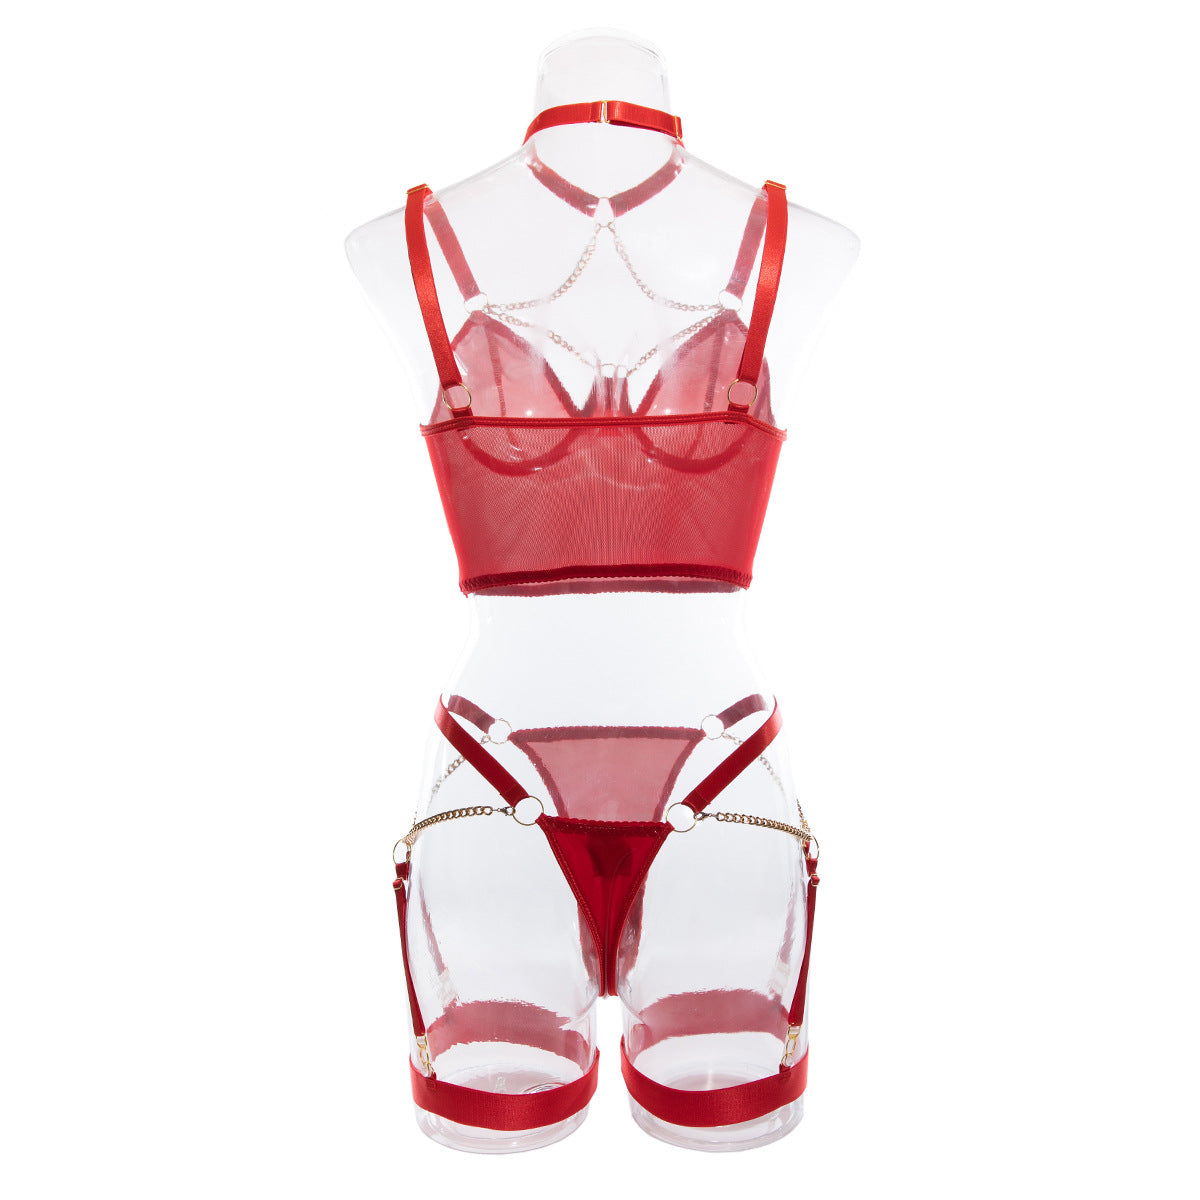 Scarlet Seduction: Glossy Lacquered Red Lingerie Set